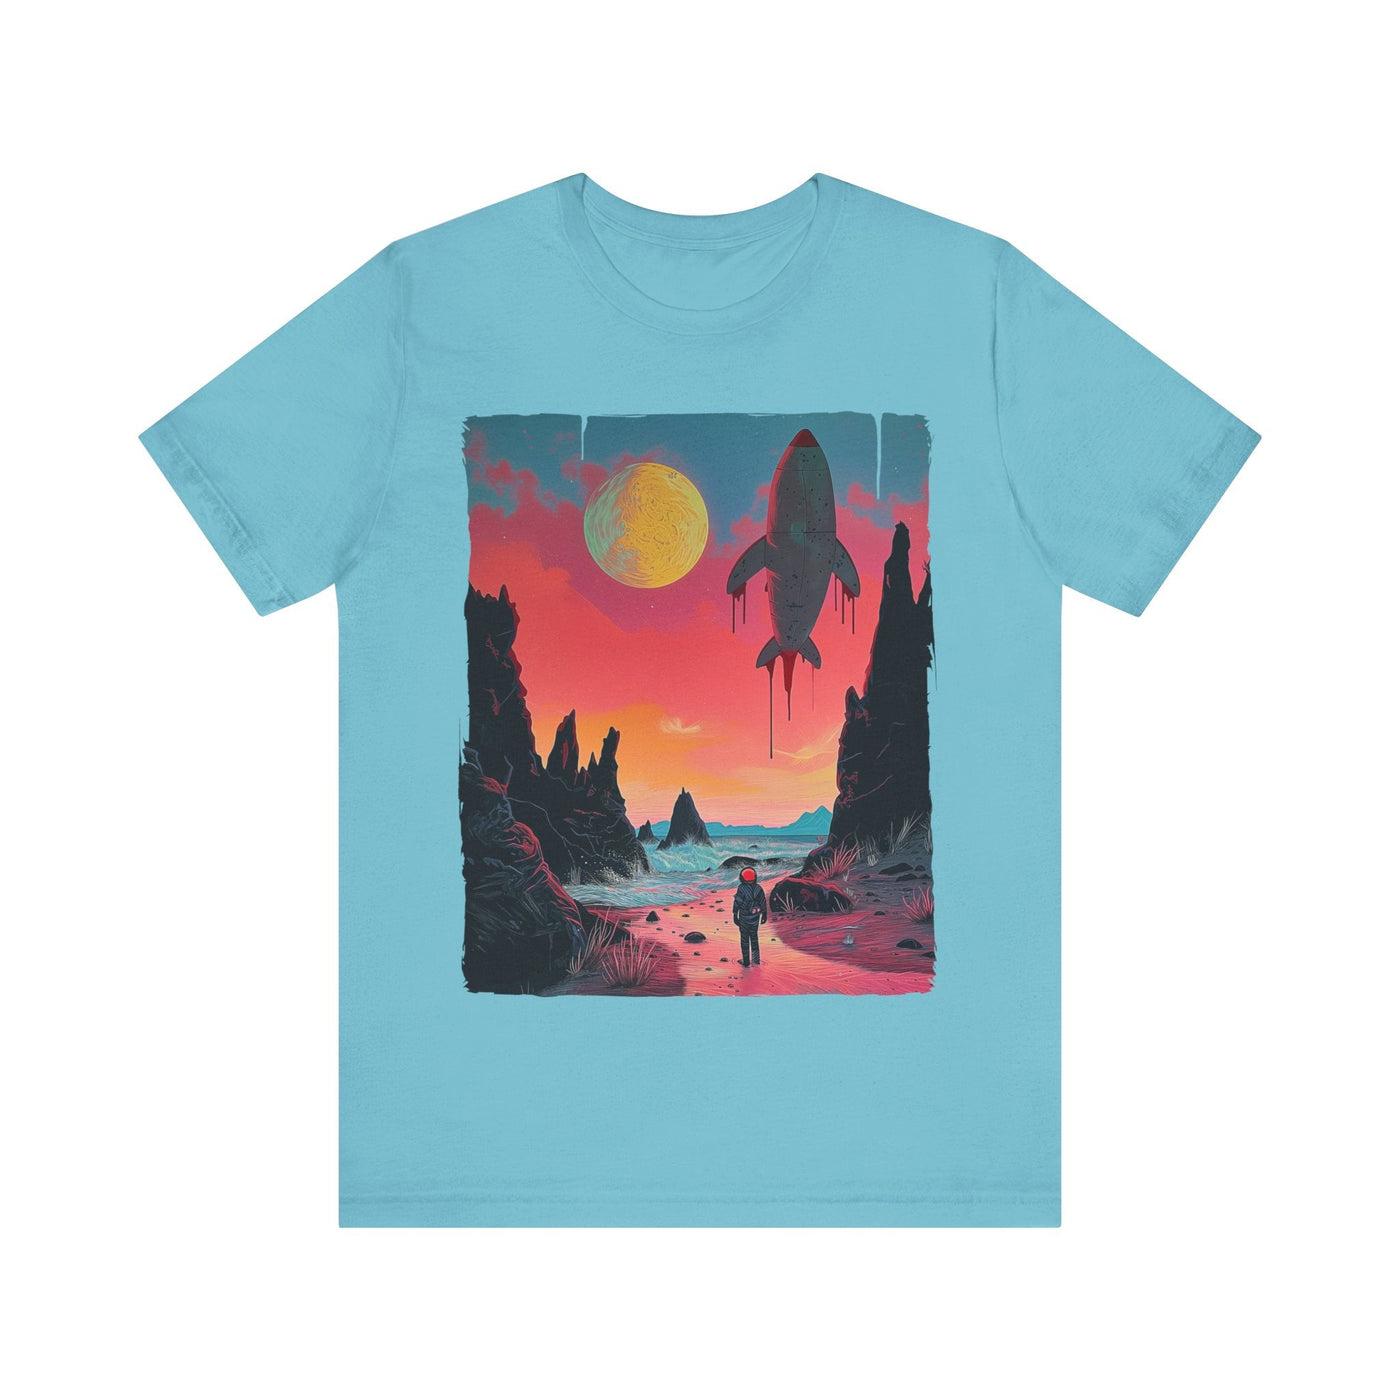 Solitary Beach in a Dystopian Future Unisex T-shirt